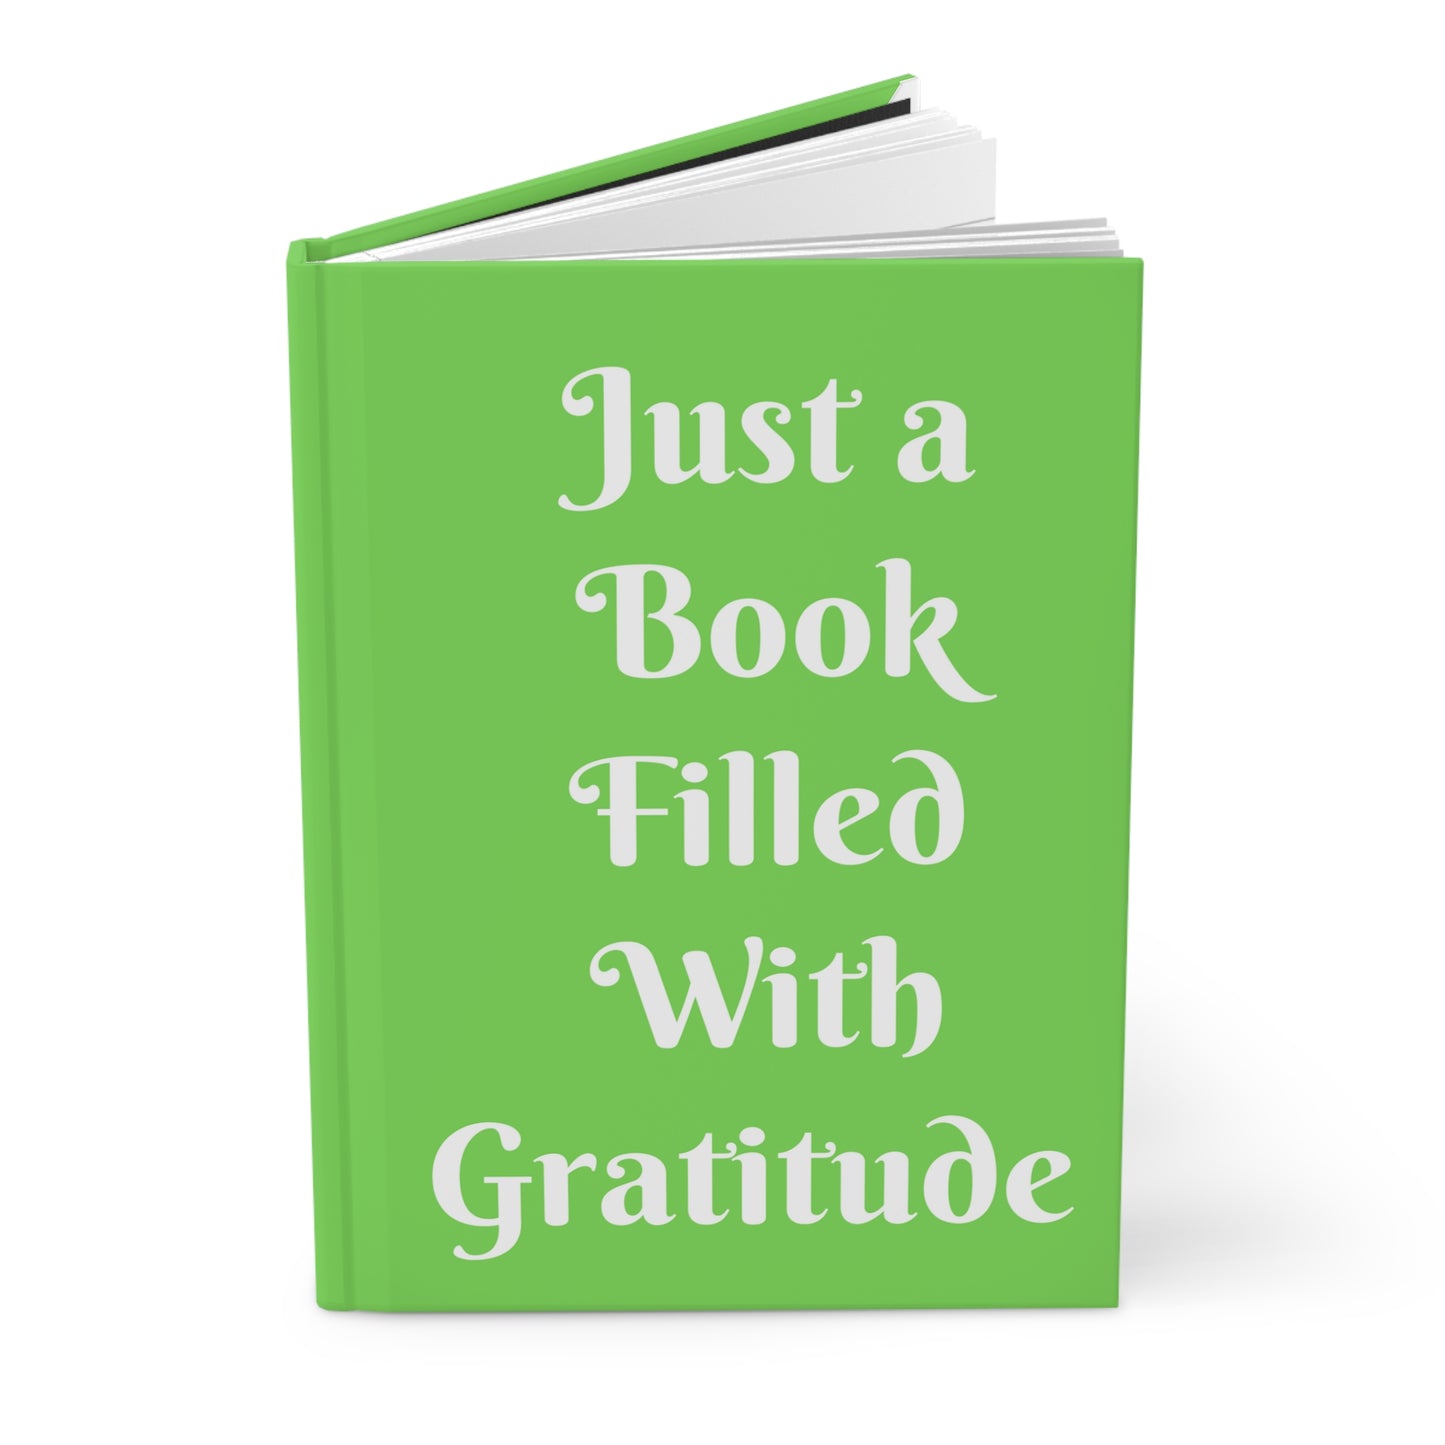 Gratitude Hardcover Notebook Journal - Daily Reflection, Mindfulness, Self Care, Wellness, Affirmations, 6 Month Diary, 5.75"x7.5"